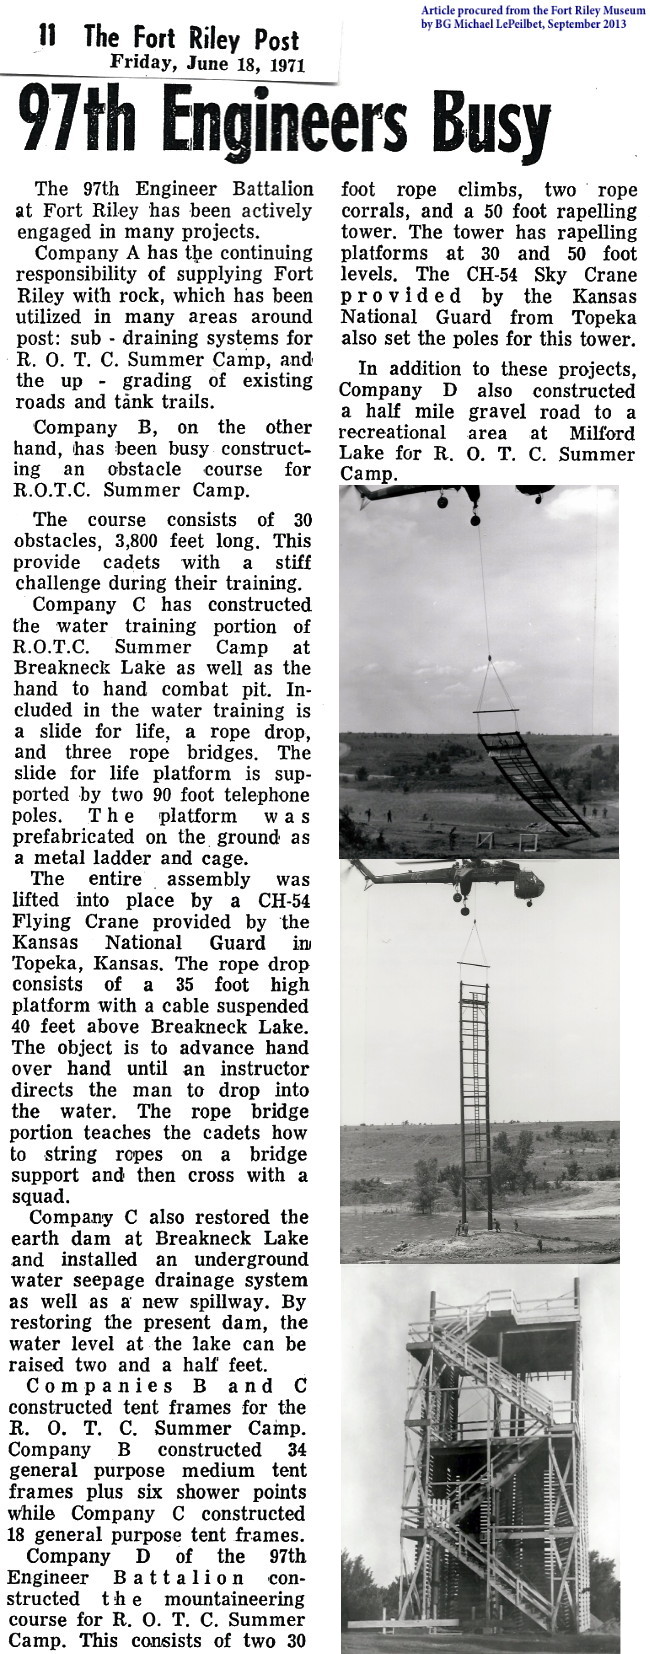 The Fort Riley Post article, 18 June 1971